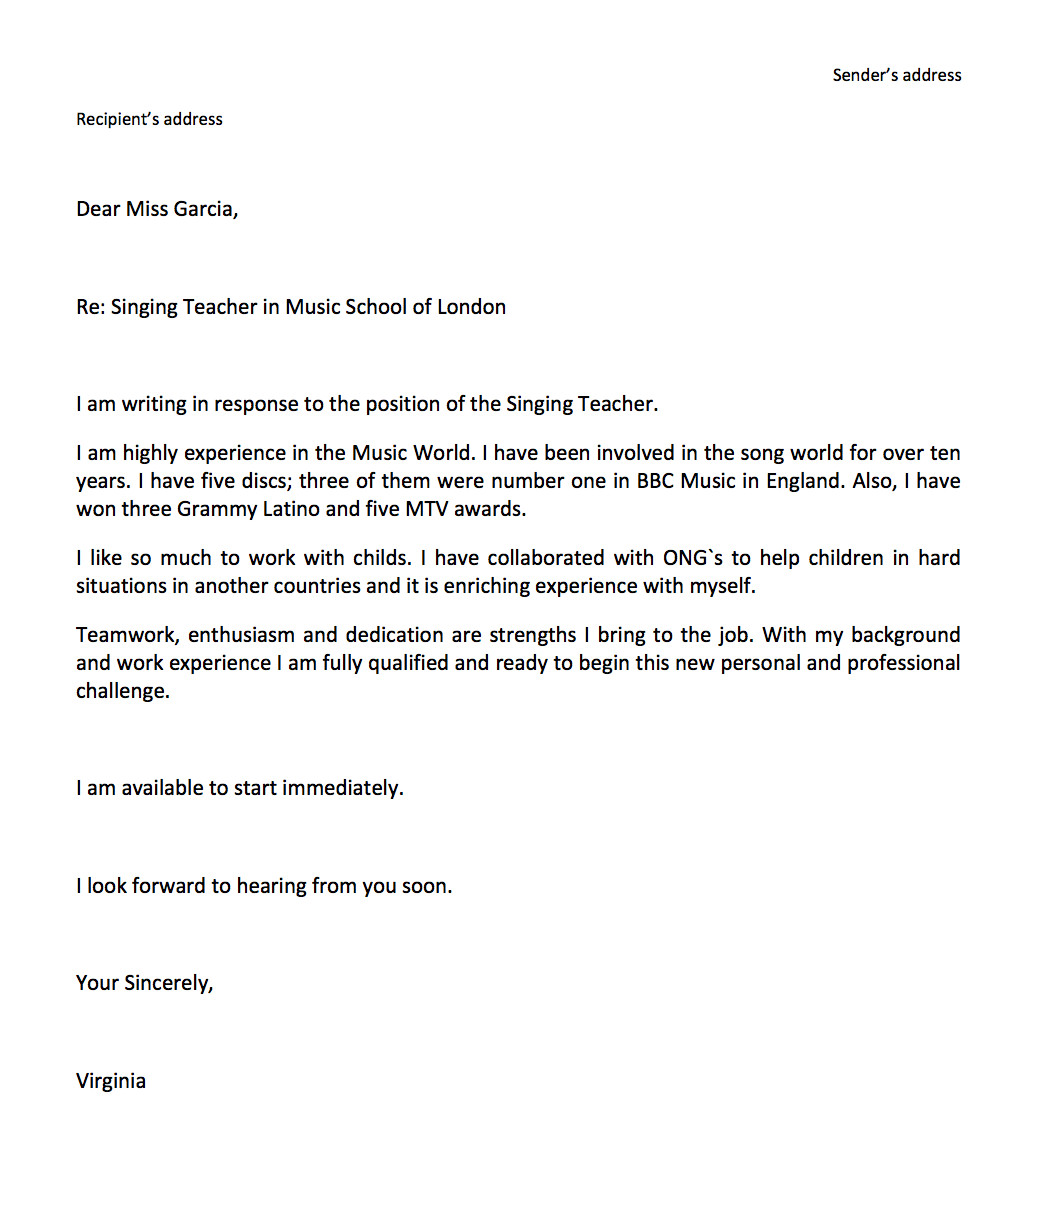 sample cover letter for high school student with no work experience